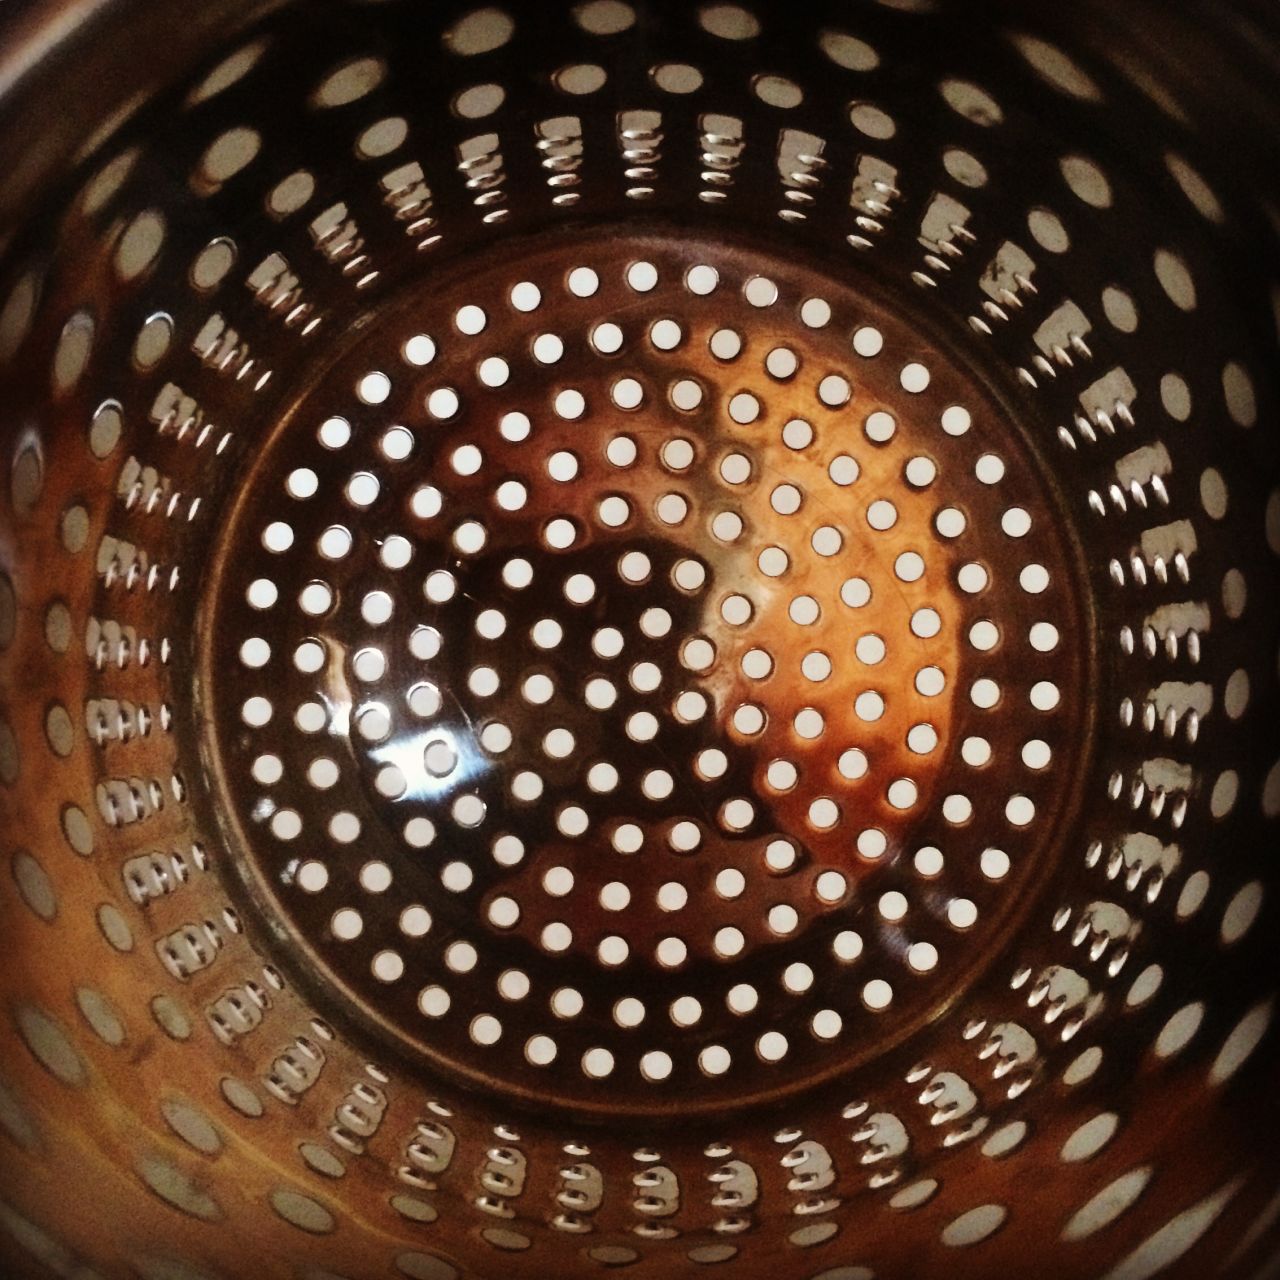 The kitchen can be another source of distress for anyone with a fear of holes. This image is of a simple colander. <br /><br />"Disgust is an aversive emotion and can be a nasty thing to experience," said Tom Kupfer, who studies disgust at the University of Kent in Canterbury, England. "If you have too much disgust and it's too strong and too regular, like people with trypophobia can have day after day, it's a pretty unpleasant experience."